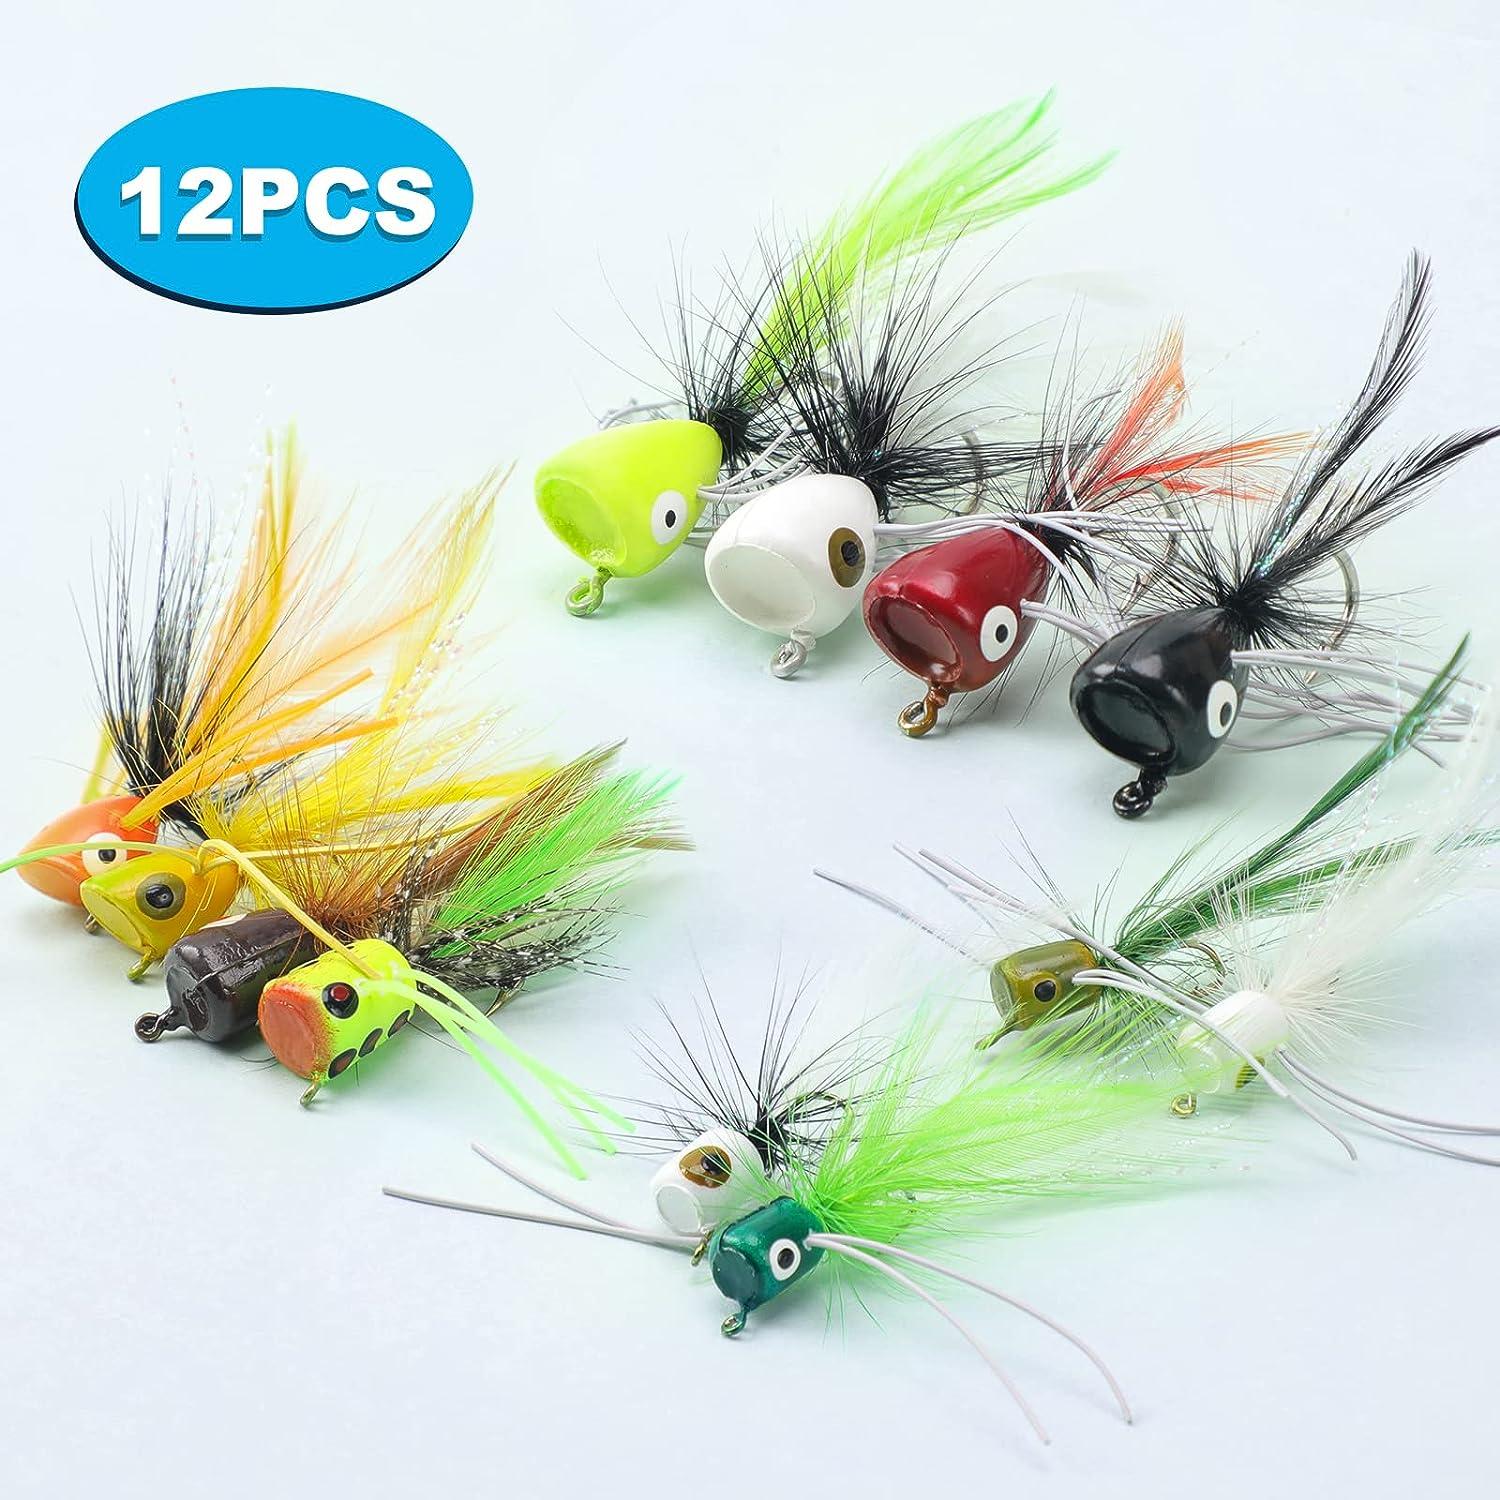  FishingPepo Fly Fishing Poppers, Topwater Fishing Lures Bass  Crappie Bluegill Sunfish Panfish Trout Salmon Perch Steelhead Flies For Fly  Fishing Bass Panfish Bluegill Trout Salmon